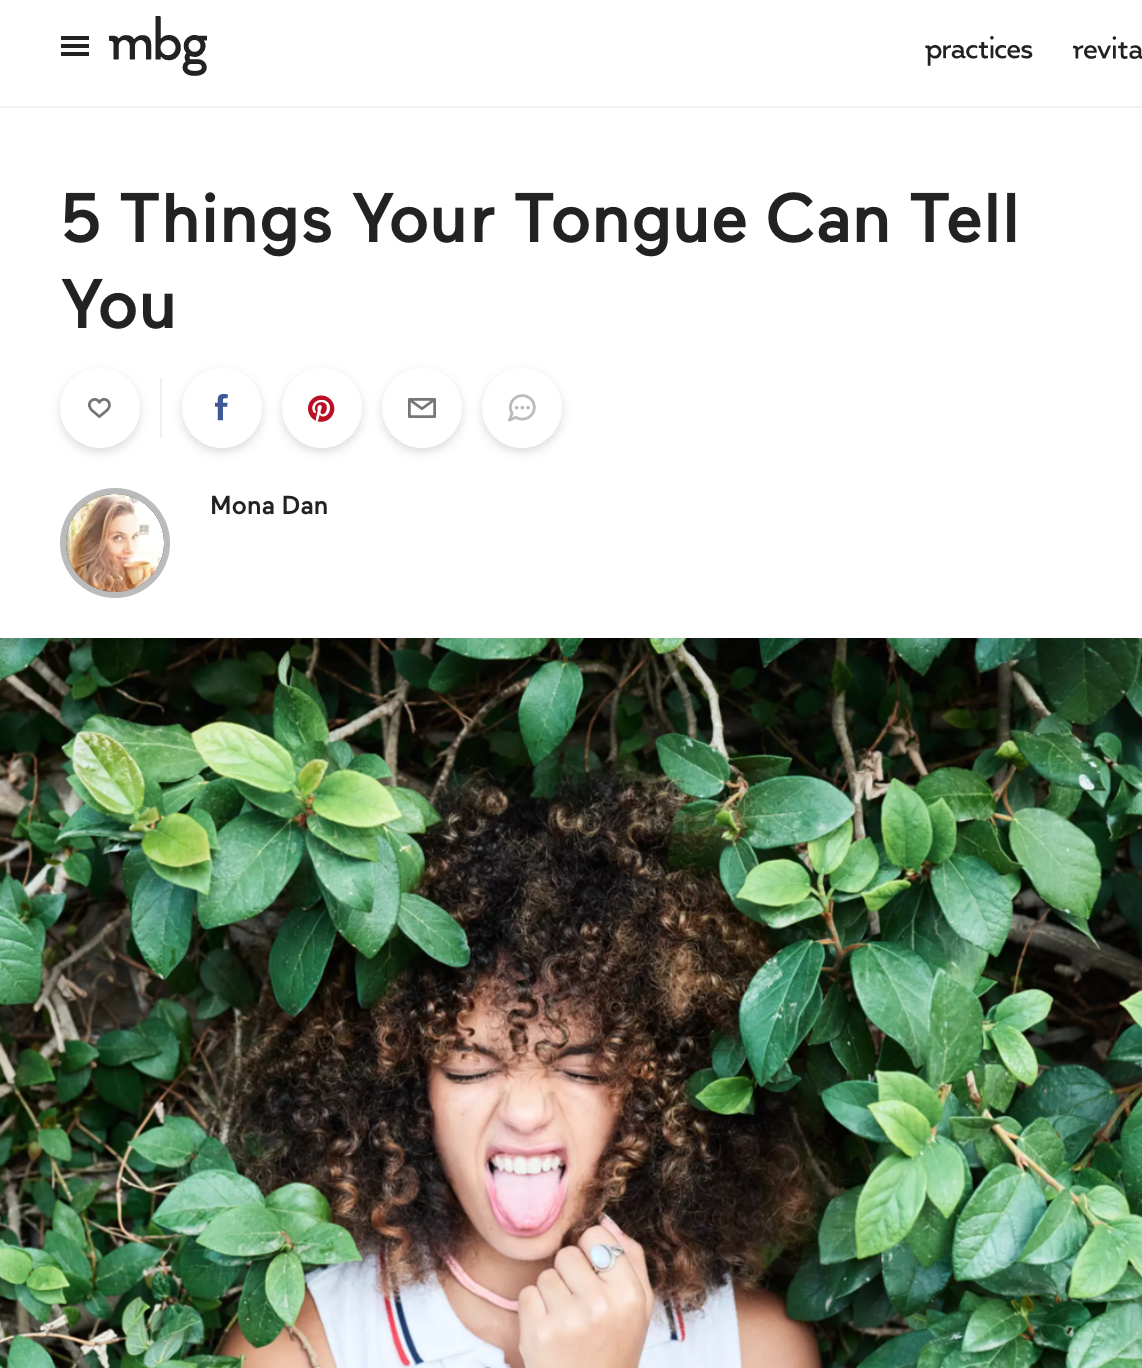 5 Things Your Tongue Can Tell You